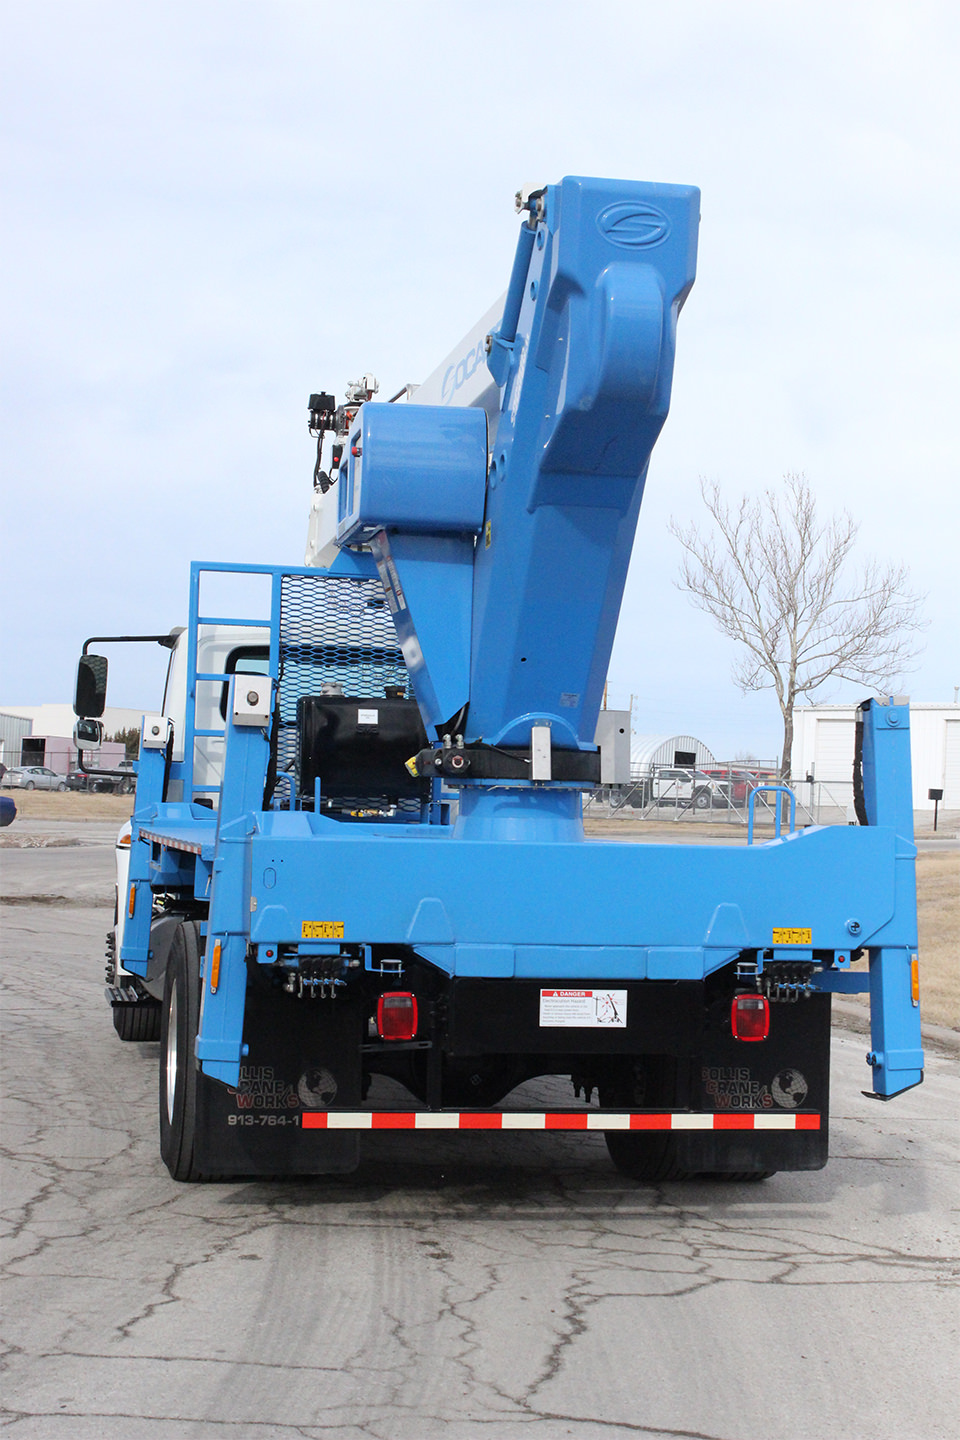 New Socage 72TW aerial lift for sale on International 4300SBA chassis Rear